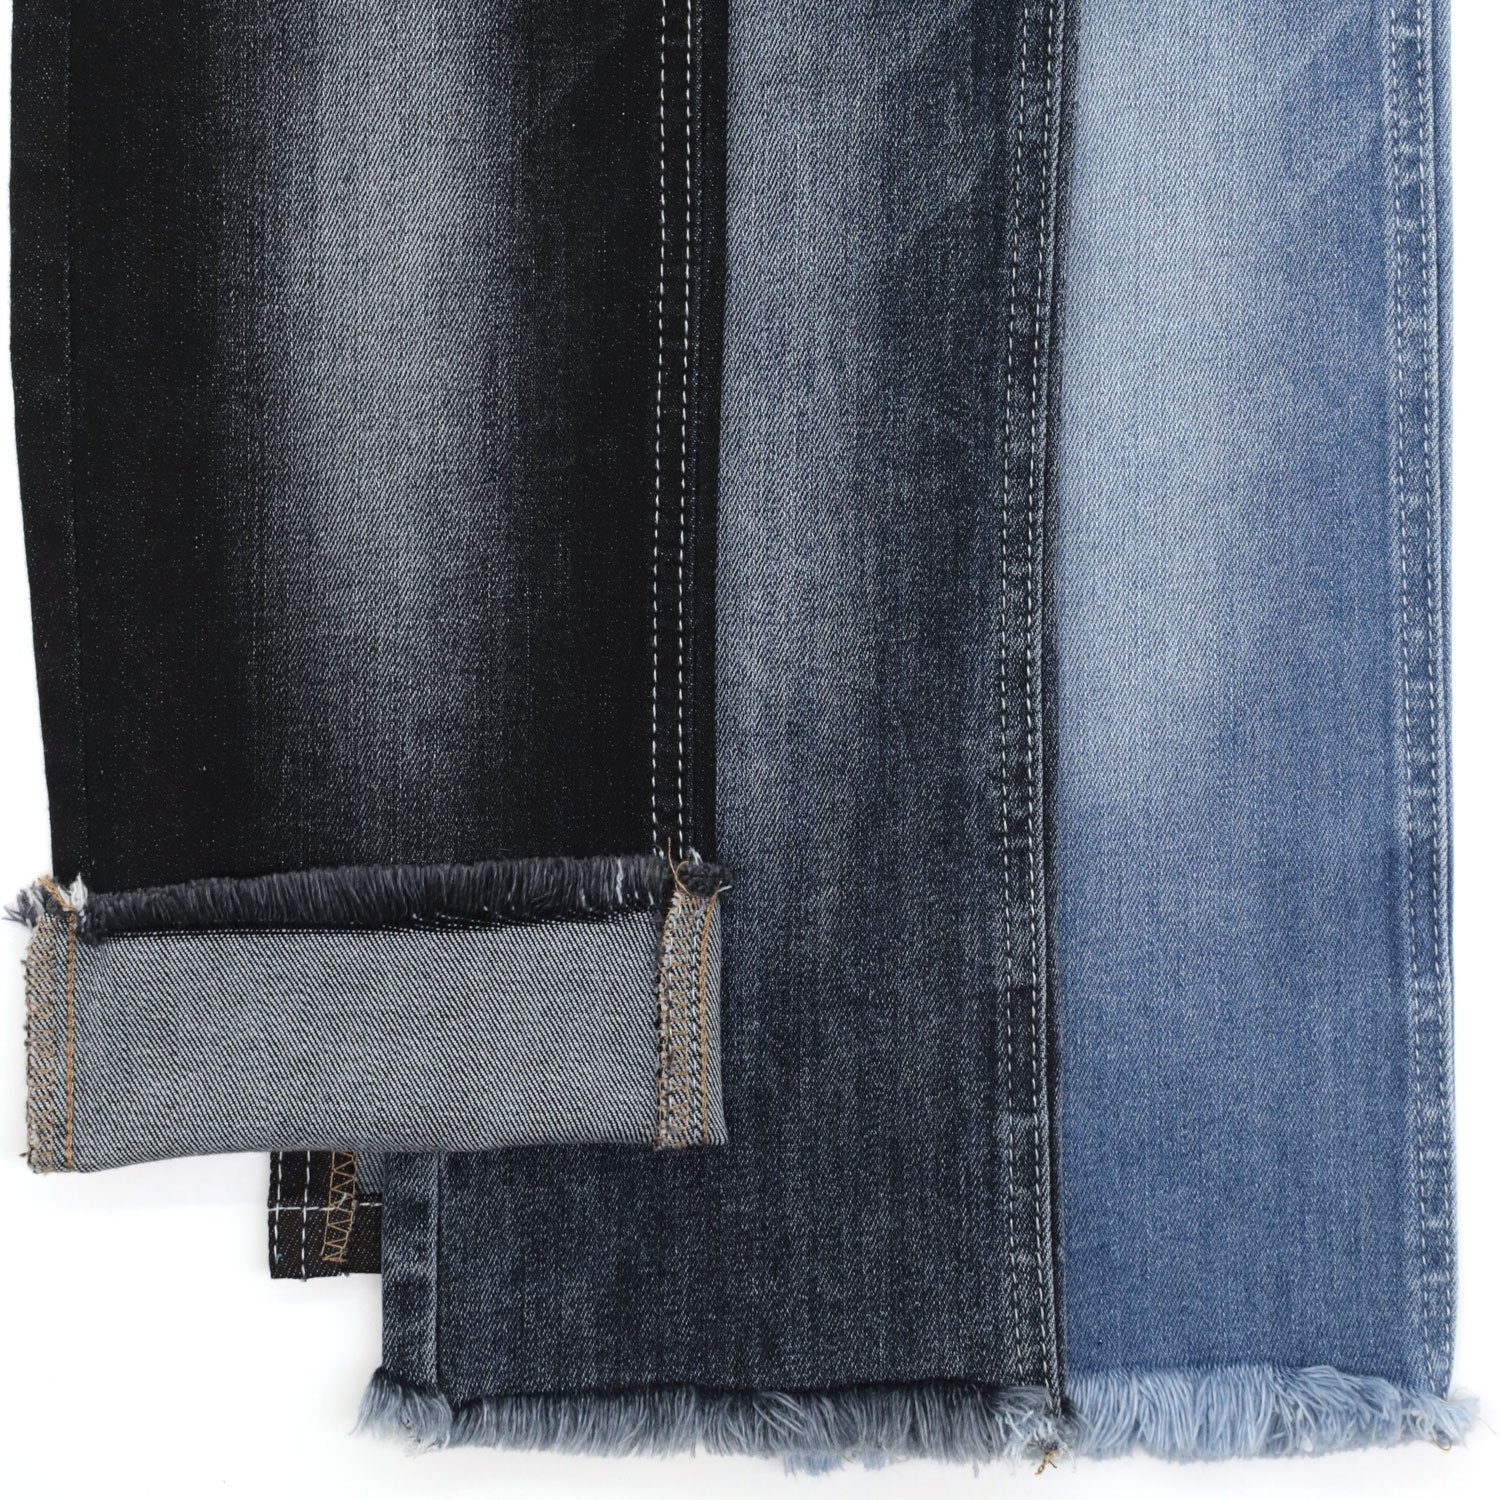 Whats the Best Denim Fabric for Jean Brand in China? 1